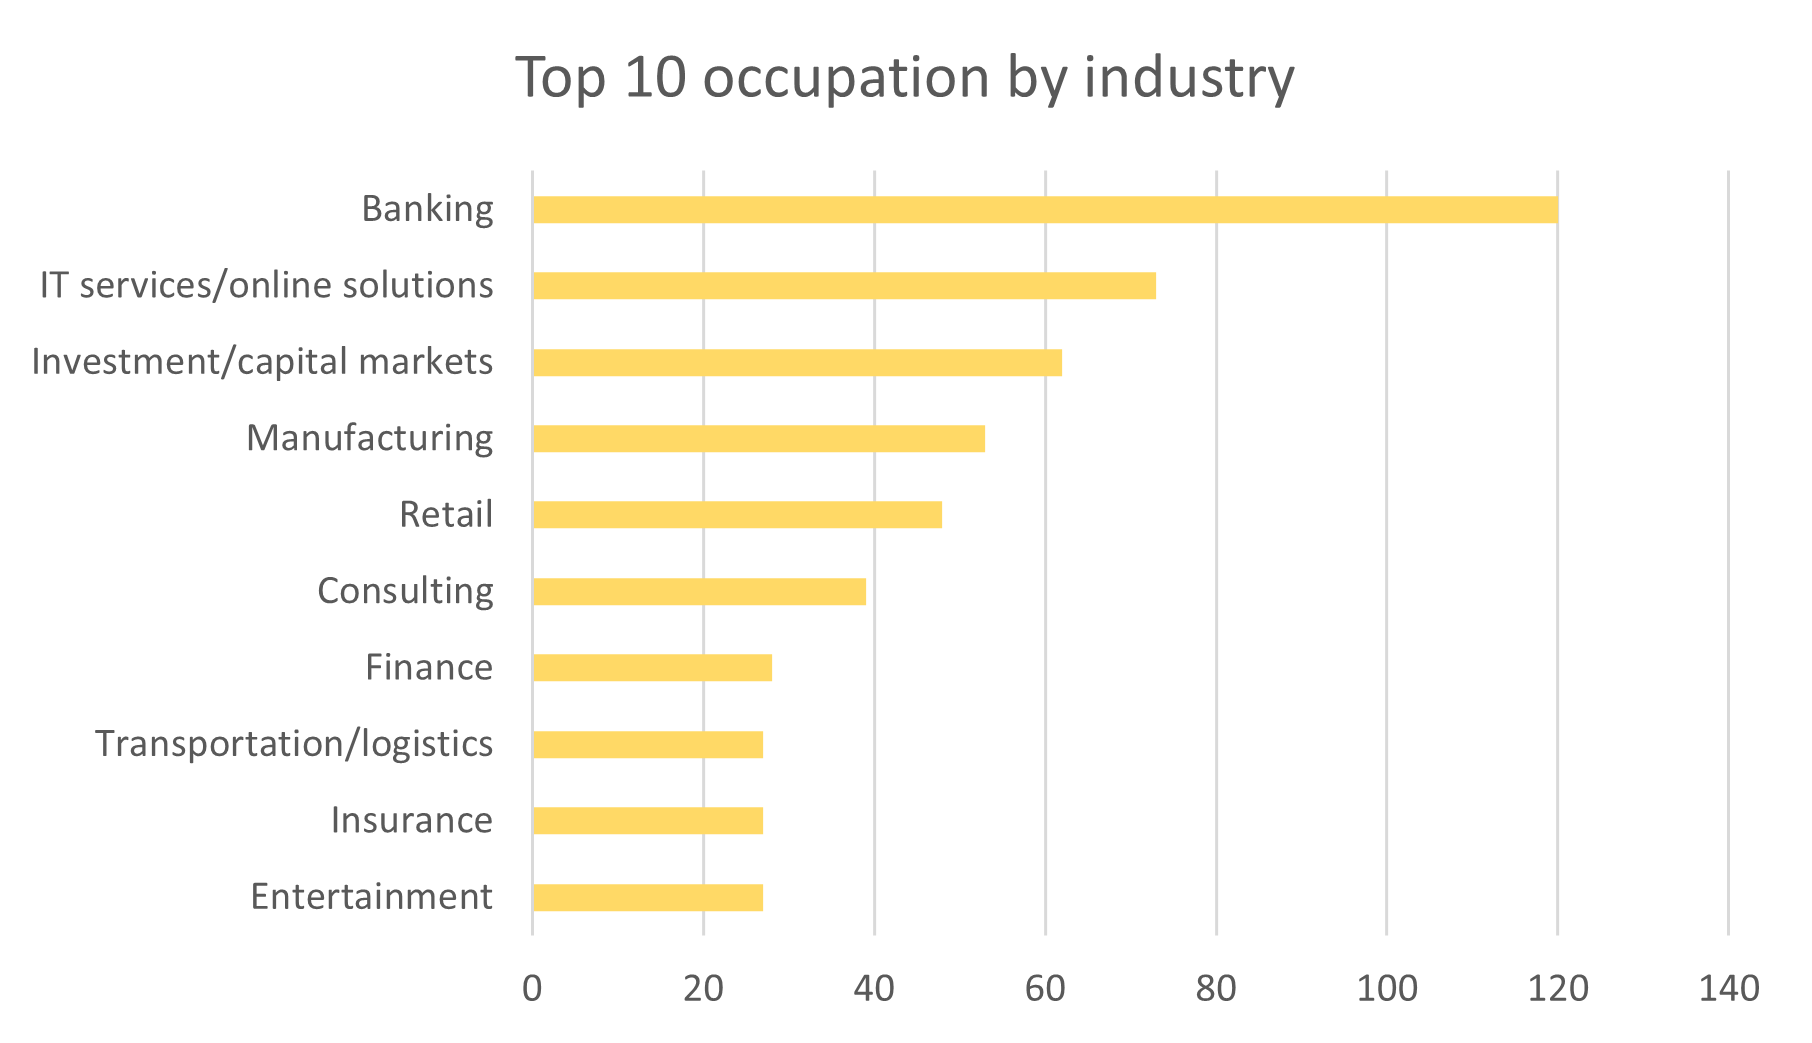 Top 10 occupation by industry